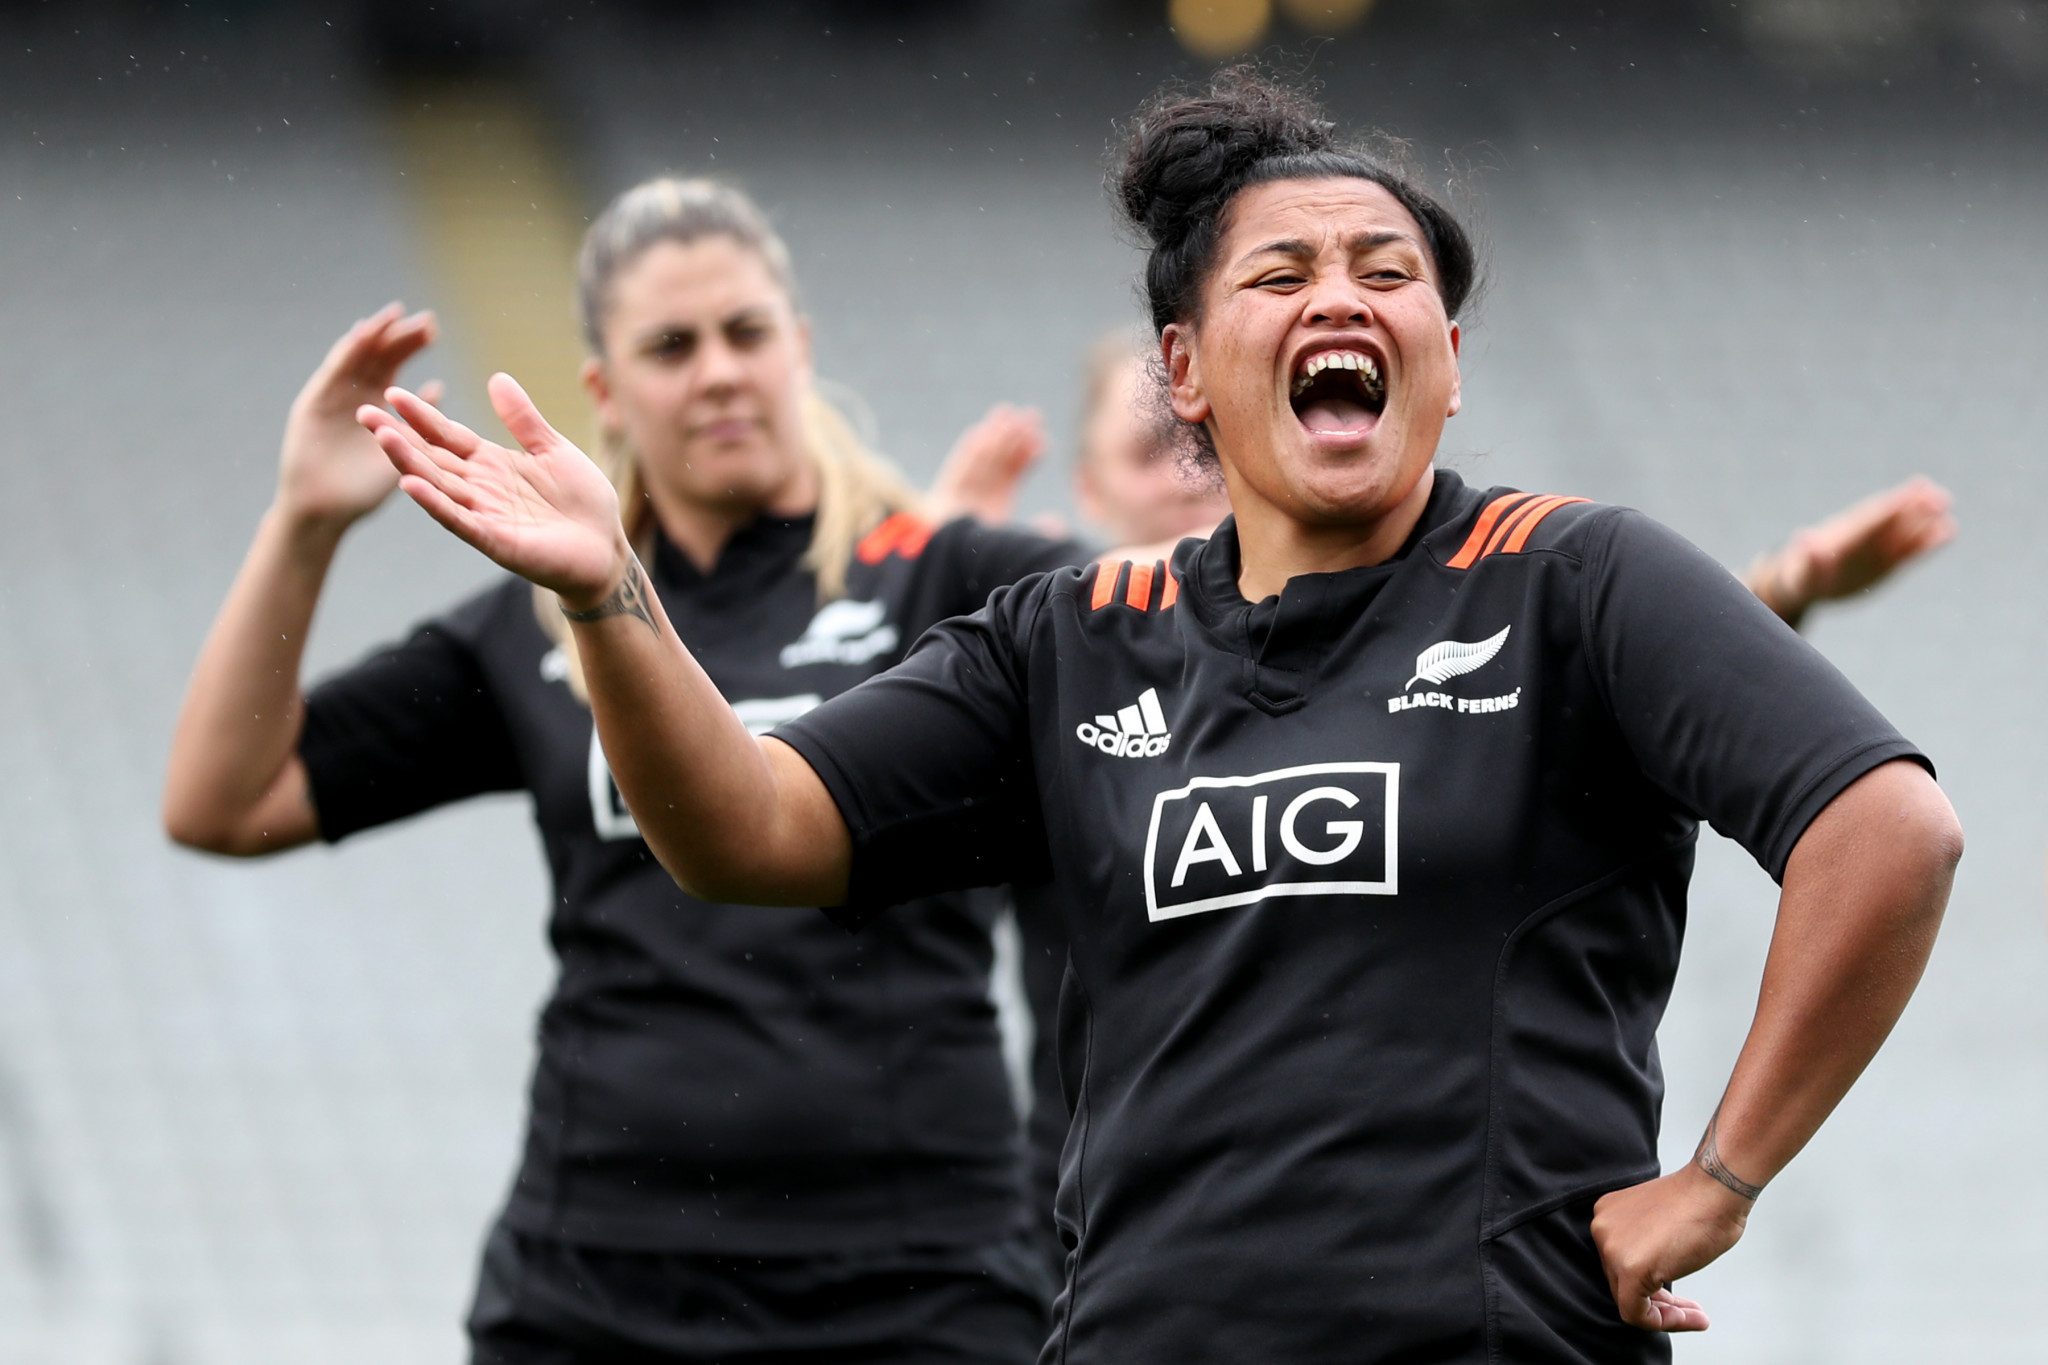 Te Kura Ngata-Aerengamate made allegations against Glenn Moore which sparked a review into the Black Ferns culture and eventually led to his resignation ©Getty Images